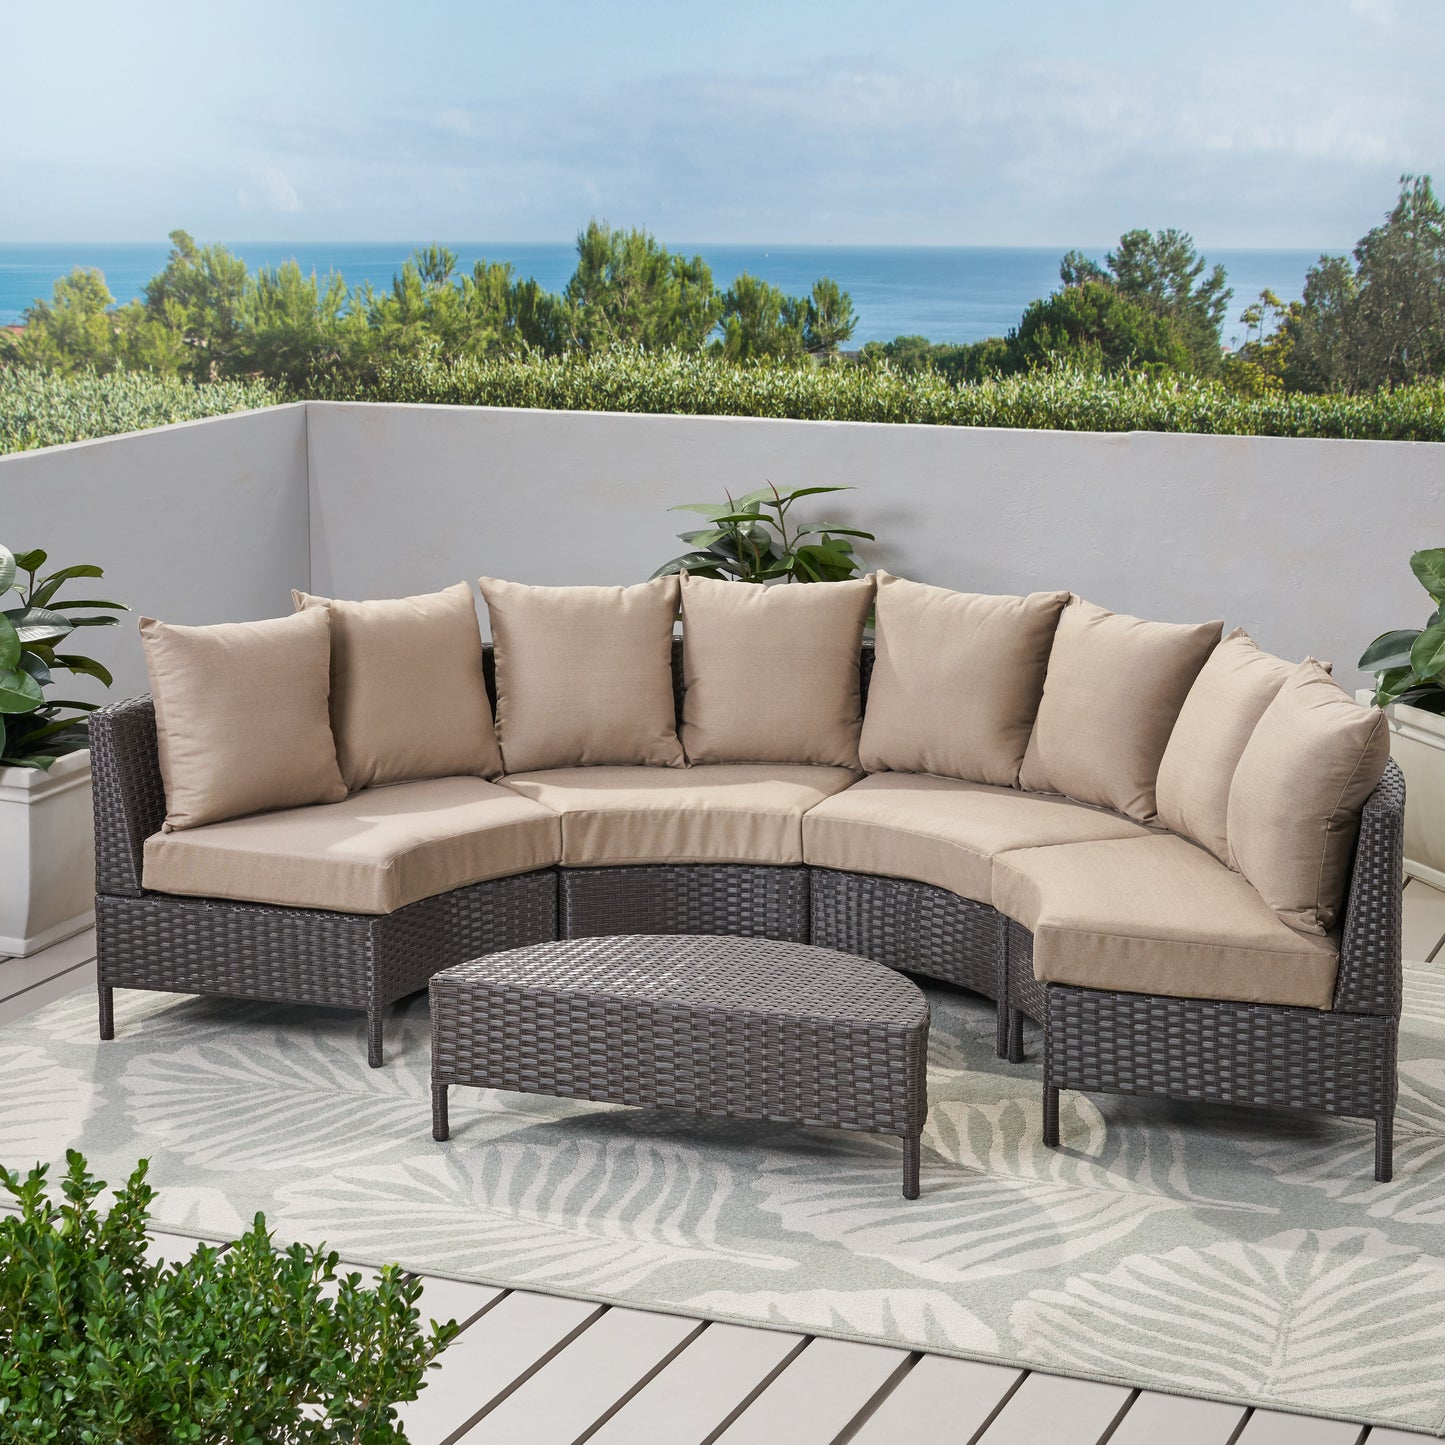 Falkland Outdoor 4 Seater Curved Wicker Sectional Sofa Set with Coffee Table